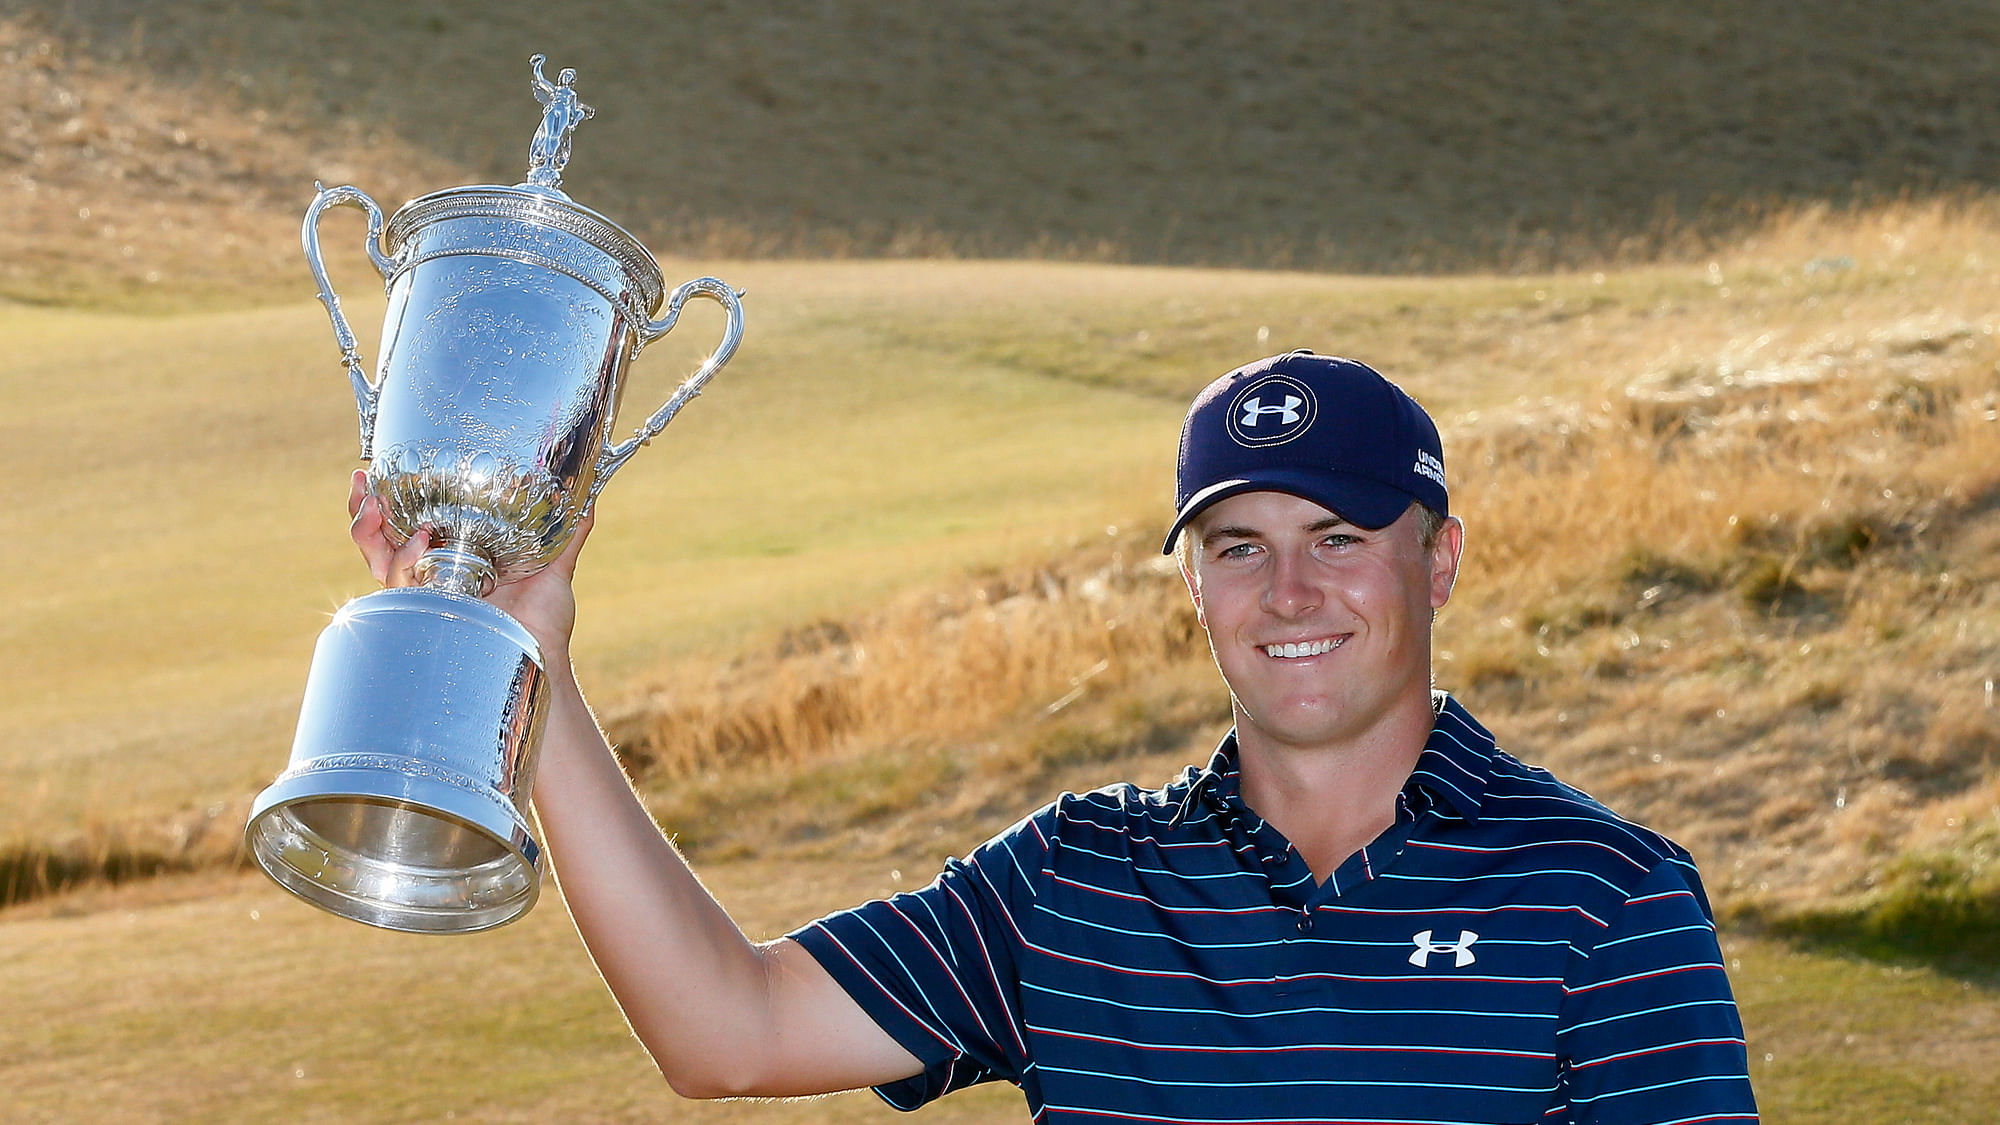 Jordan Spieth poses with the US Open trophy after his victory on Sunday. (Photo: AP)